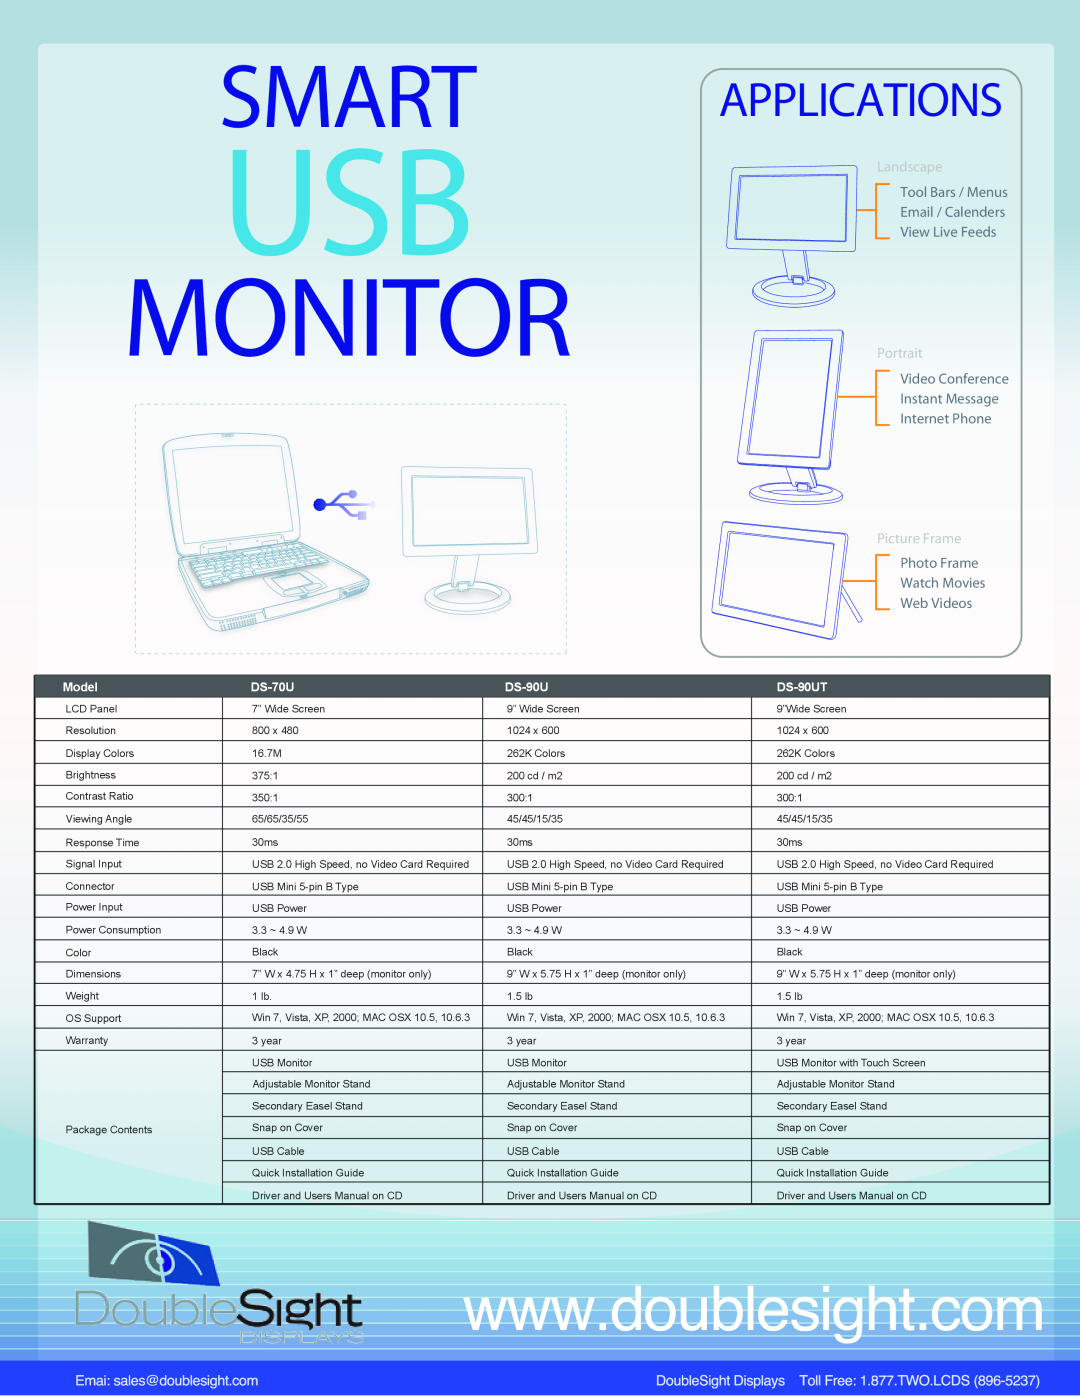 DoubleSight Displays DS-90UT Monitor, Smart, Applications, Landscape, Tool Bars / Menus Email / Calenders View Live Feeds 